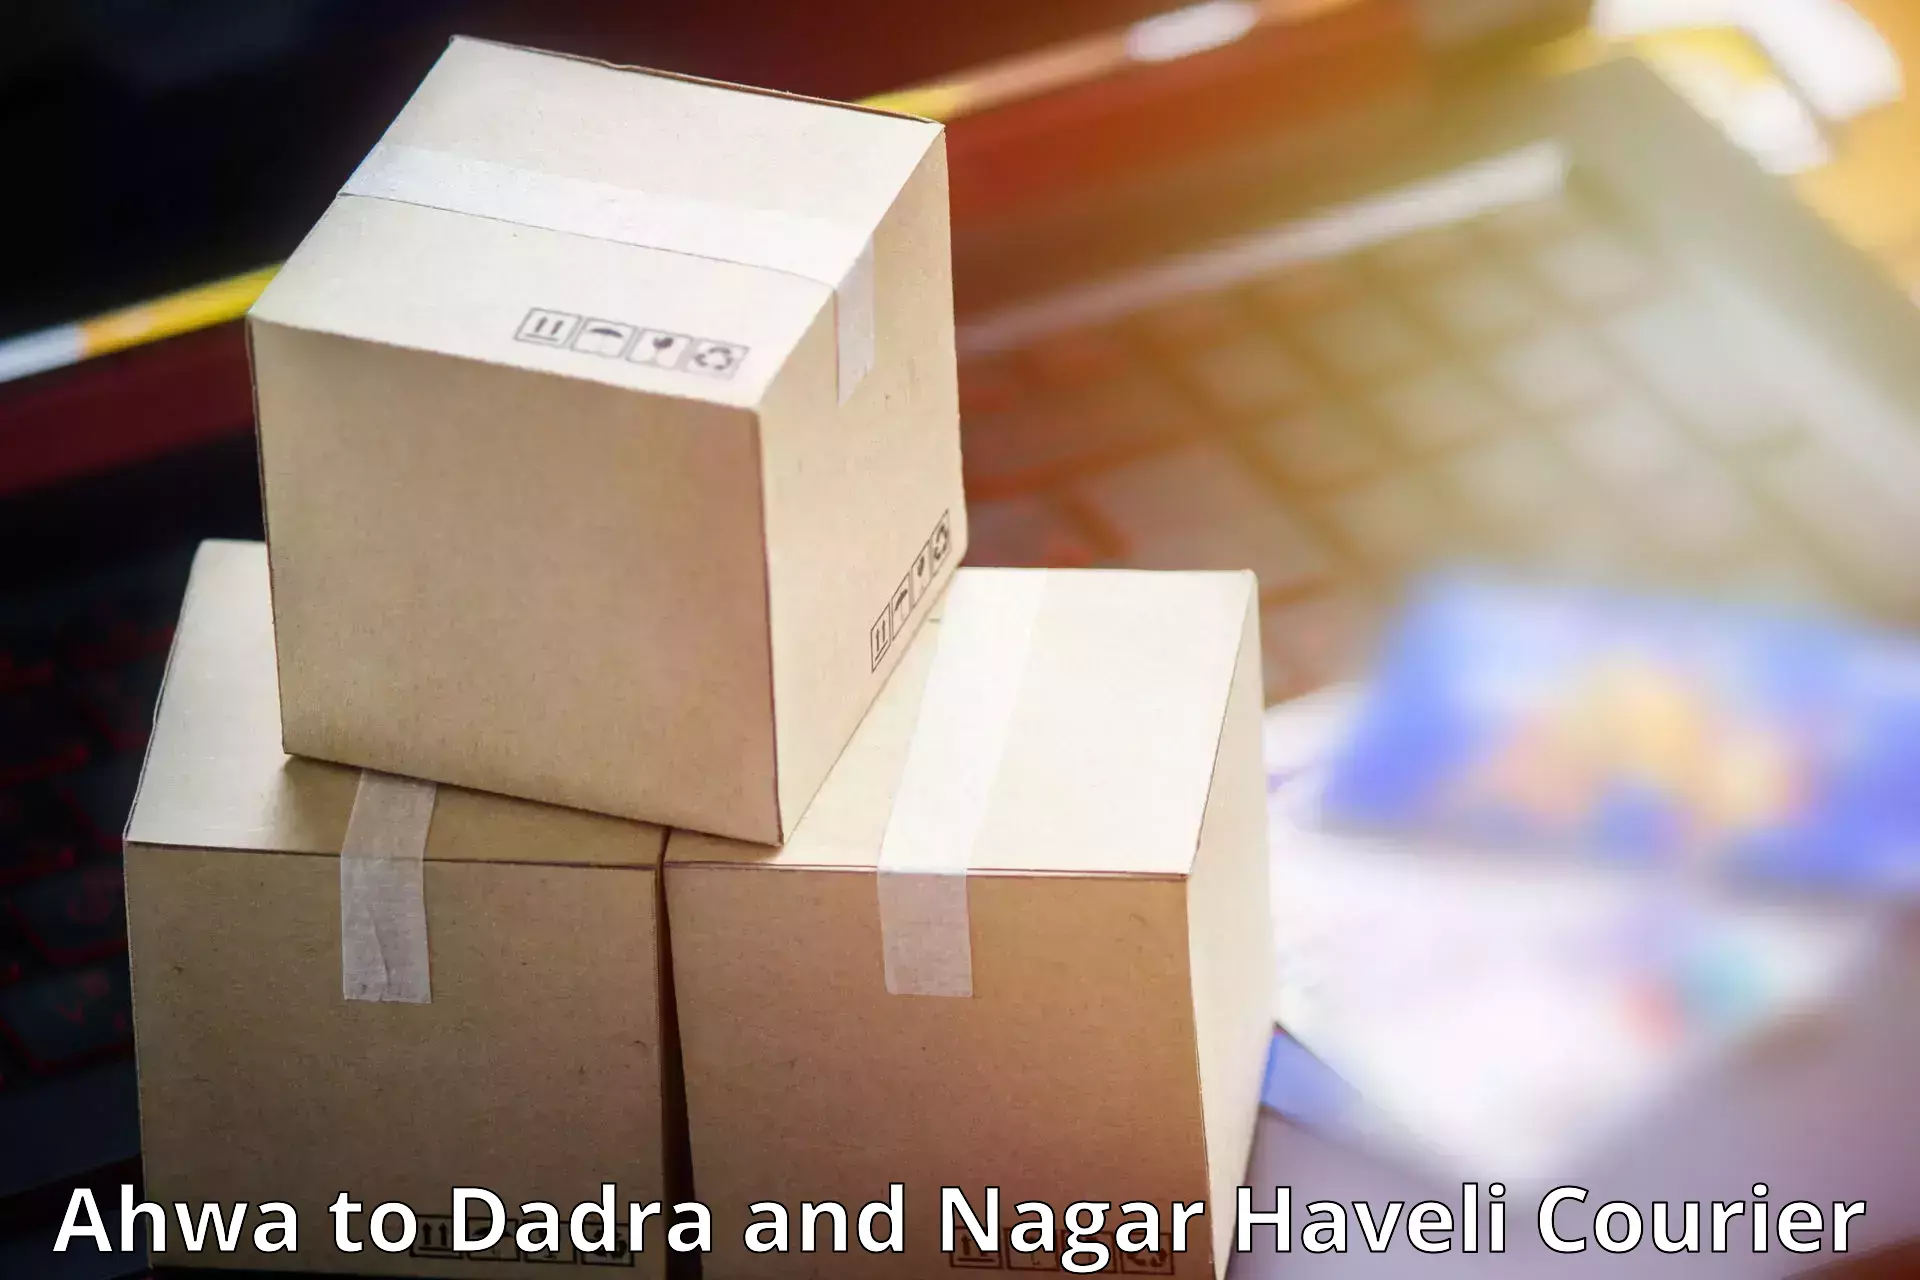 Global freight services Ahwa to Dadra and Nagar Haveli